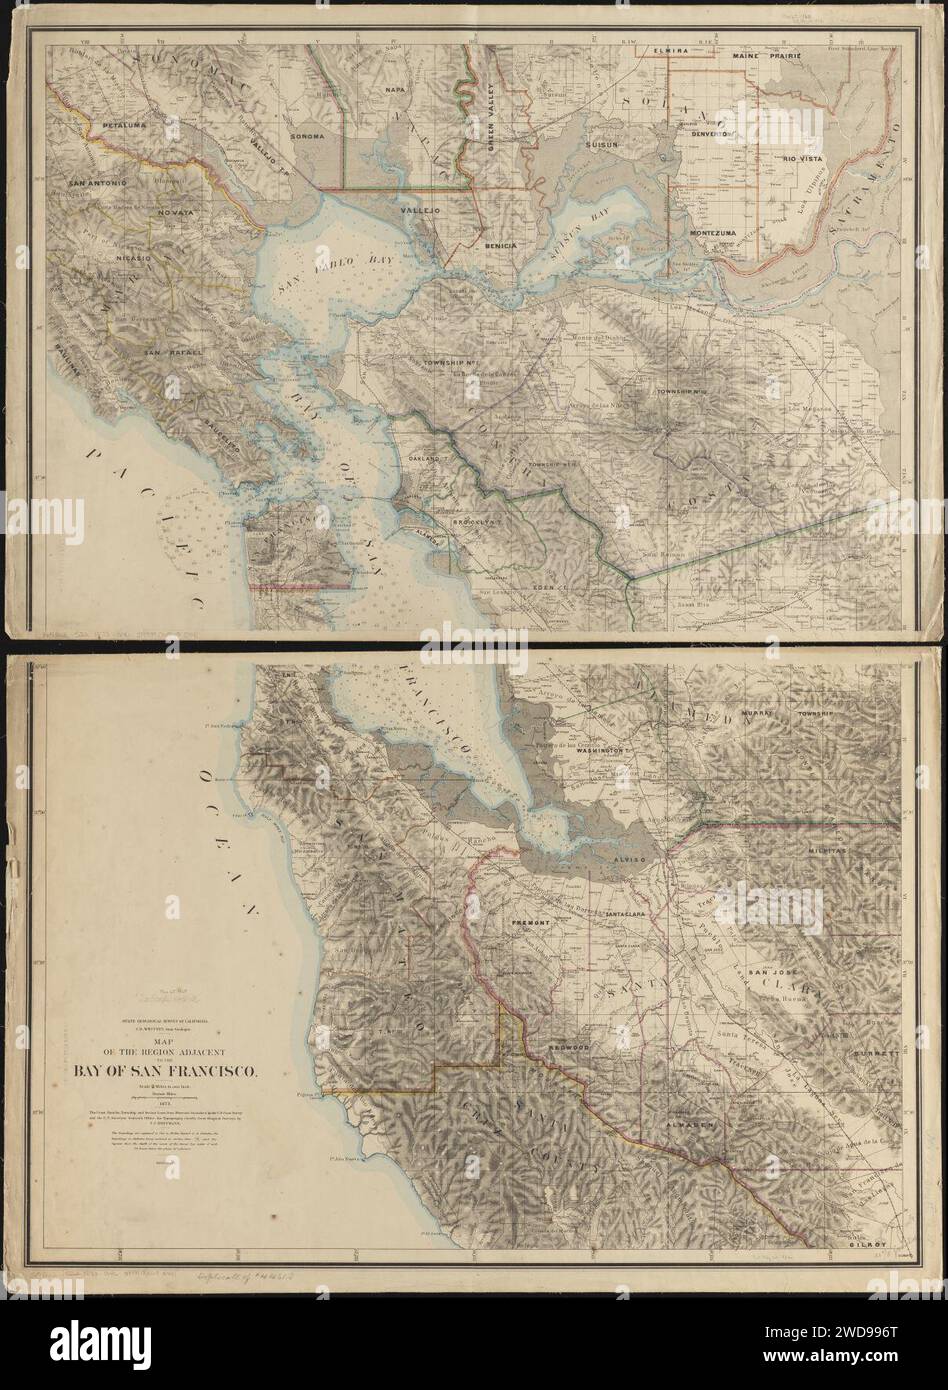 1873 Map of the region adjacent to the bay of San Francisco, by U.S. Coast Survey and Surveyor General's Office, C. F. Hoffman, Julius Bien, Stock Photo